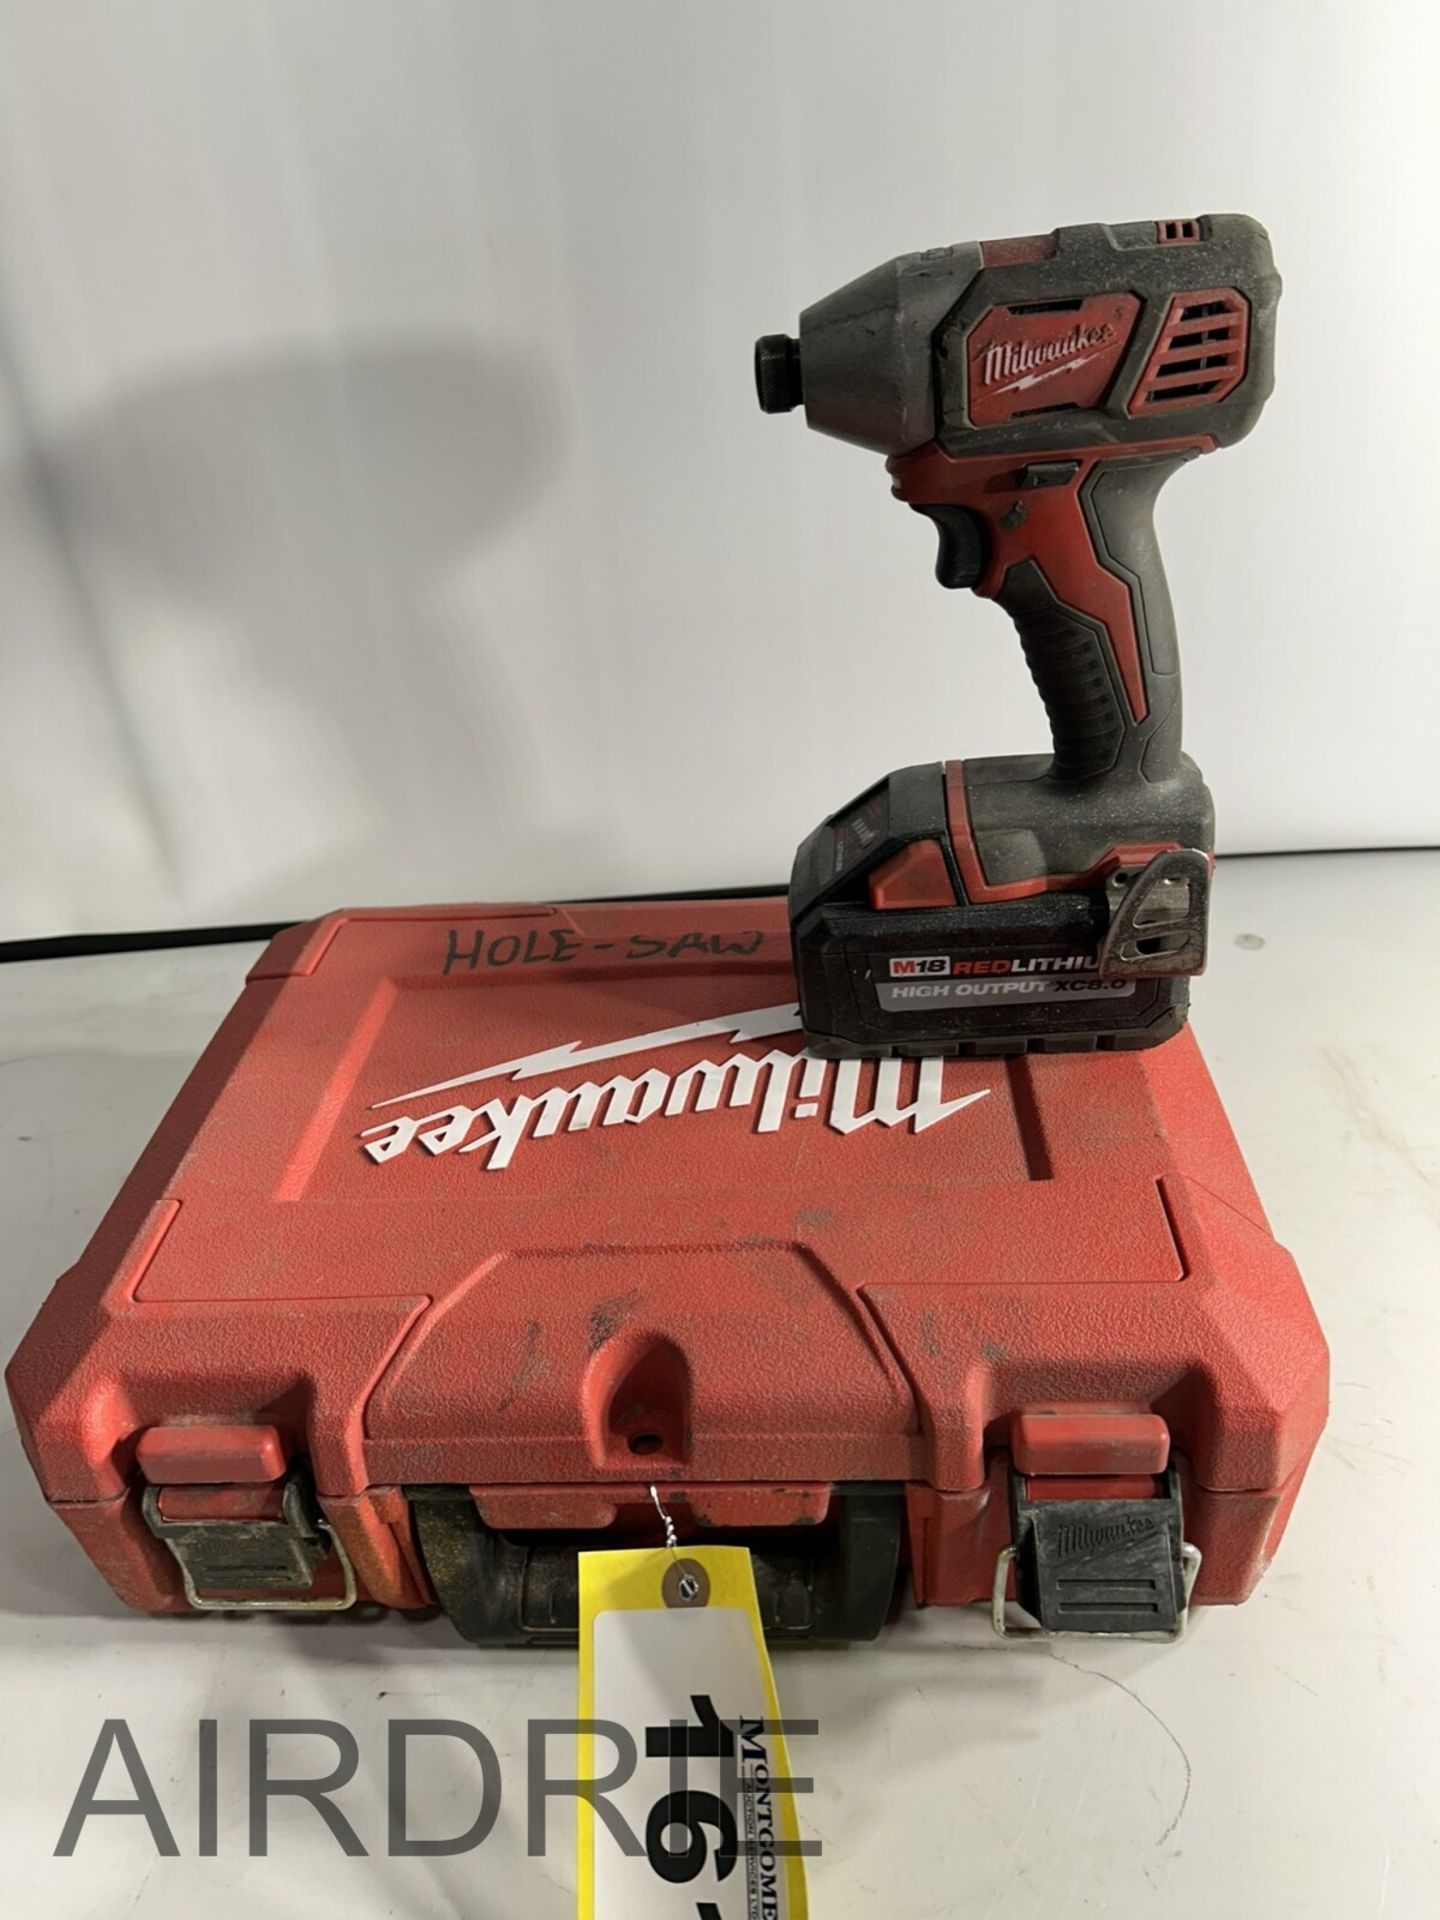 *OFFSITE* MILWAUKEE CORDLESS DRILL AND IMPACT DRIVER KIT W/ BATTERY AND CHARGER - Image 6 of 6